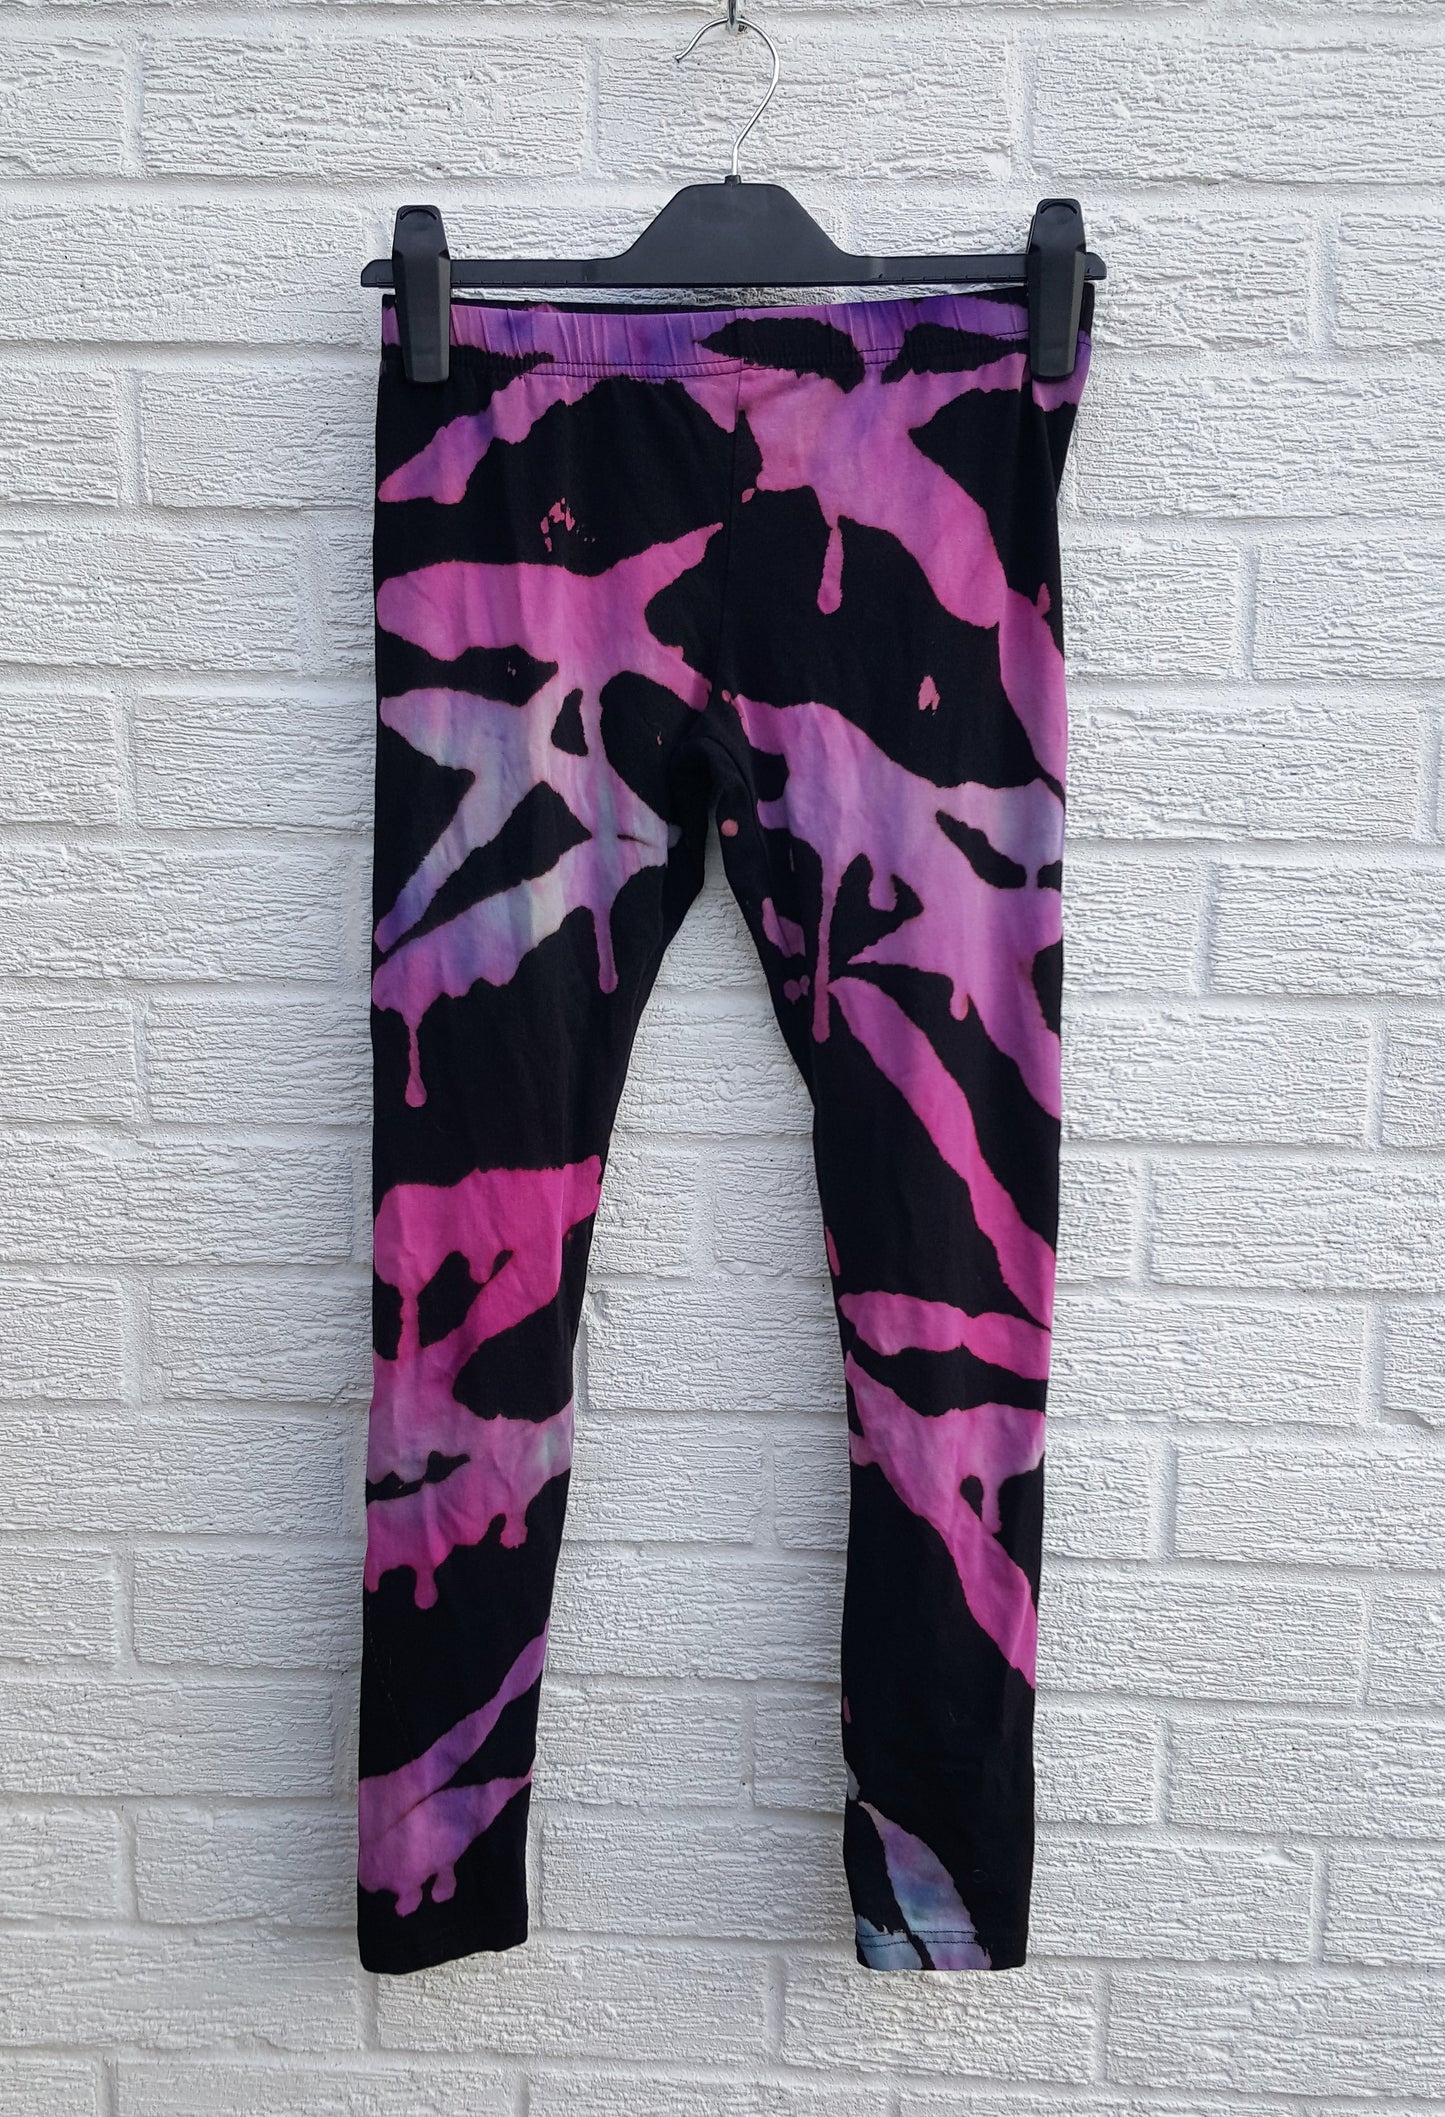 Bleach dyed and hand dyed women's leggings, perfect for yoga class! In beautiful aqua & pink bleach dye shades in 100% Cotton Size S.  Hand dyed with love by AbiDashery.  Only one pair available.   We only use recycled and compostable packaging!